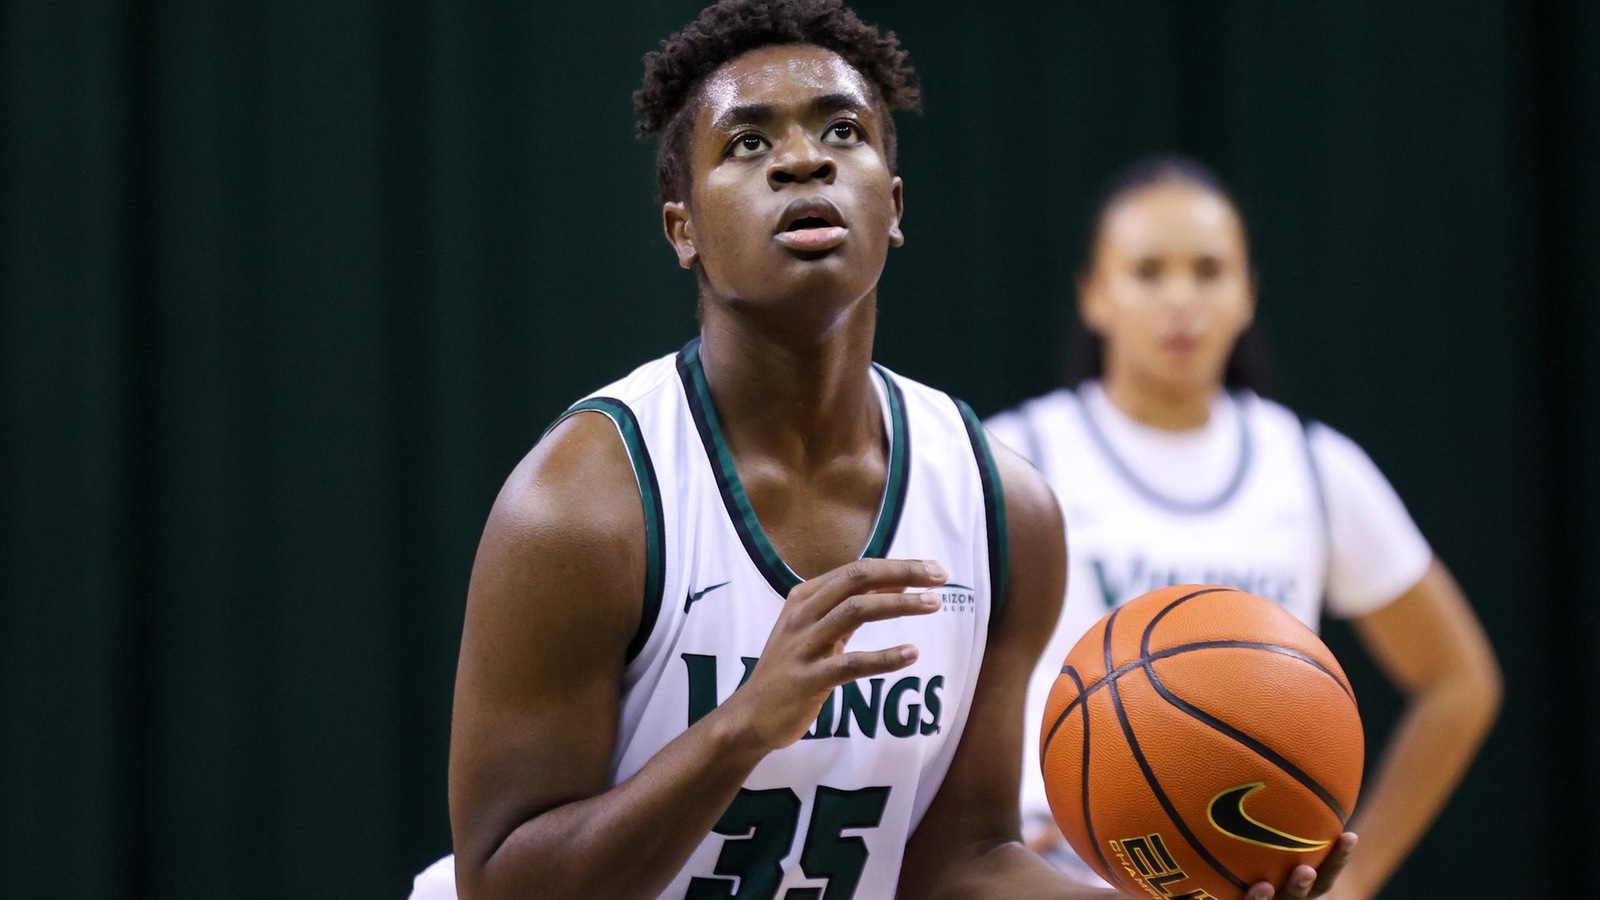 Cleveland State Women's Basketball Closes Out November Against LIU On Sunday